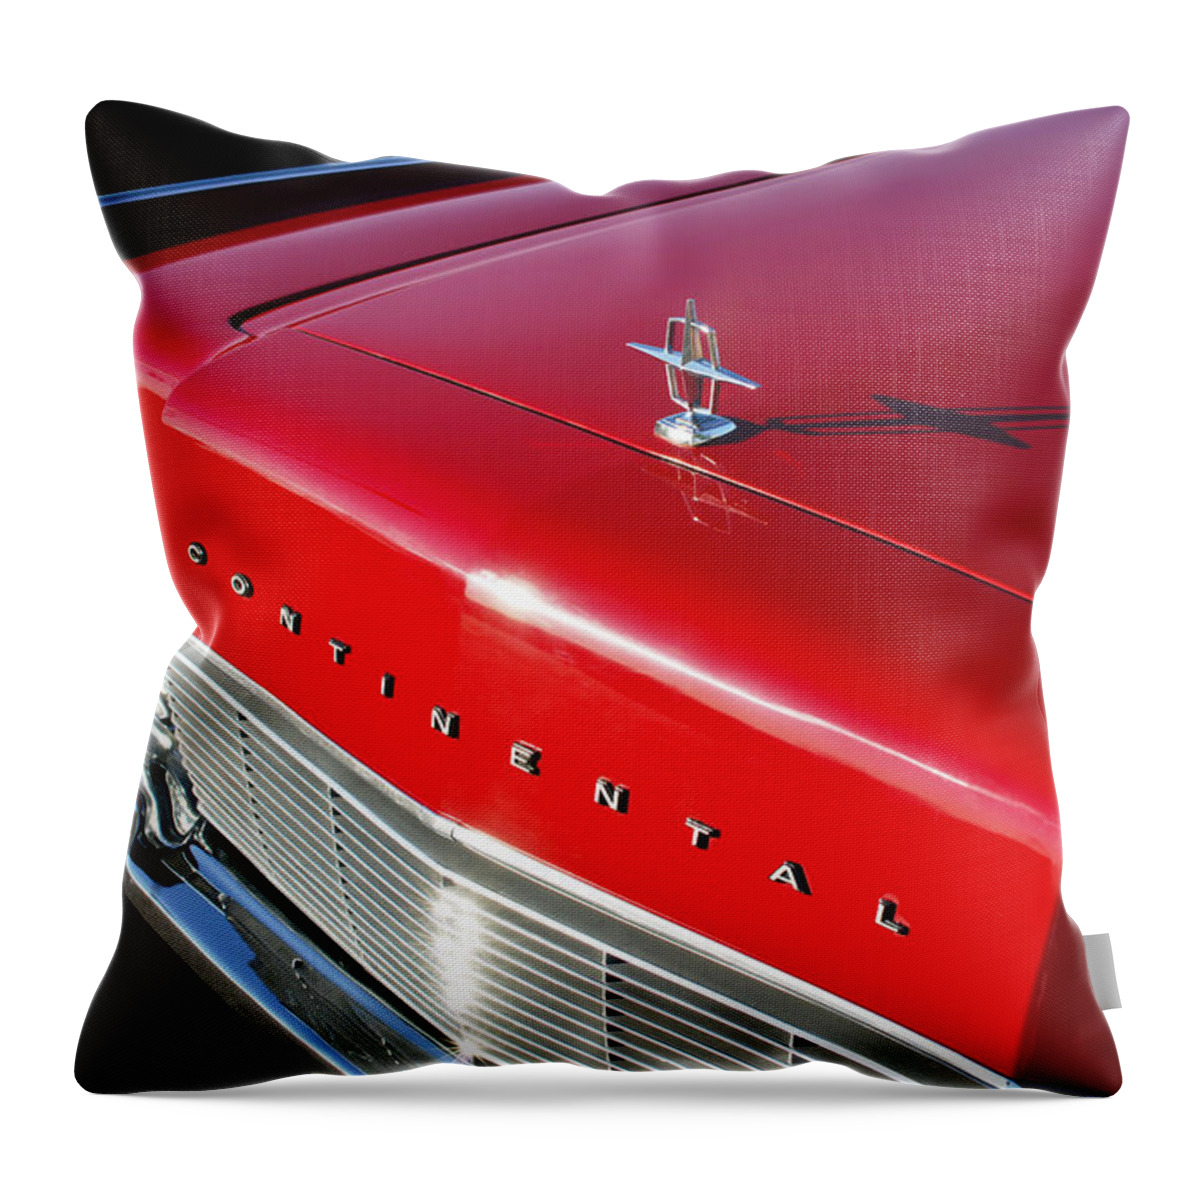 1967 Lincoln Continental Hood Ornament Throw Pillow featuring the photograph 1967 Lincoln Continental Hood Ornament - Emblem -646c by Jill Reger